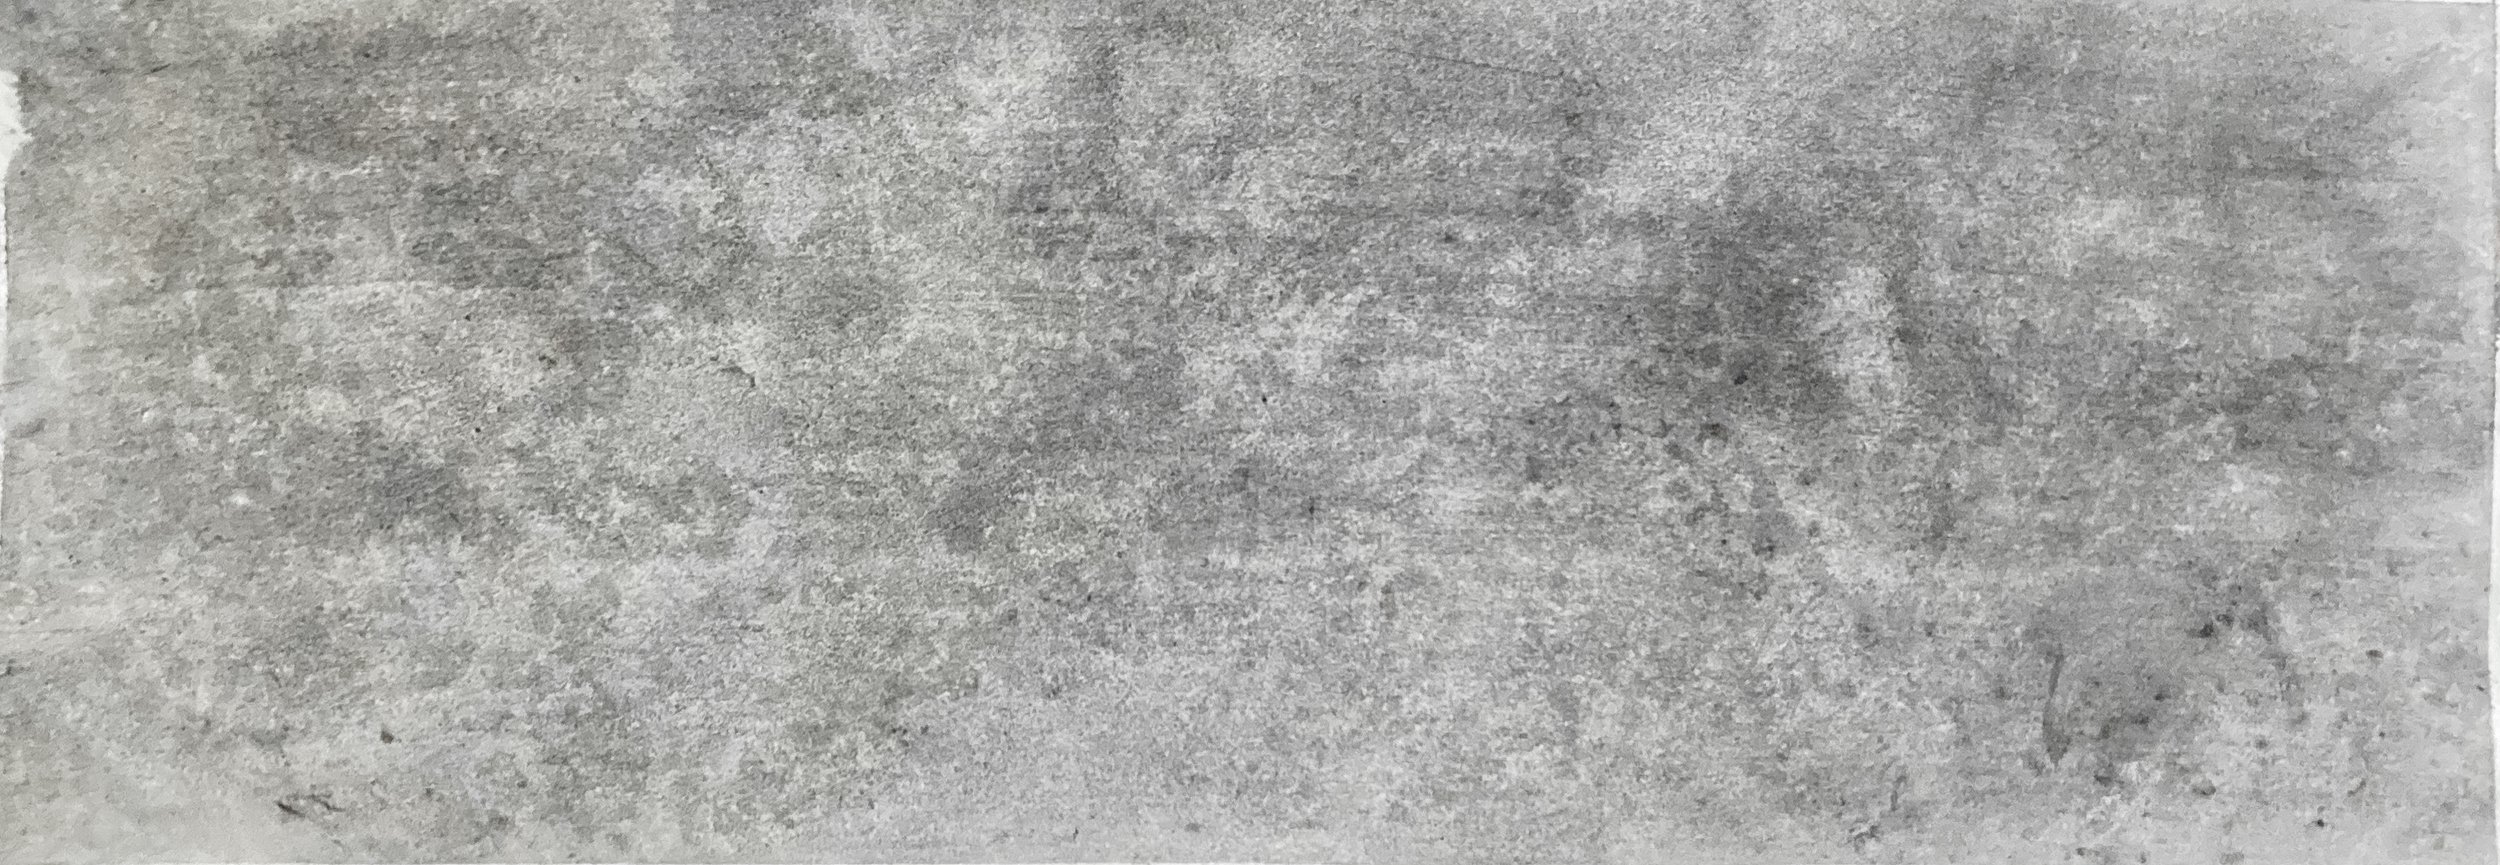  &nbsp; March 2022, Graph 1,  2022,   graphite on paper, snow cover melt, 28 x 76cm / 11 x 30 inches  